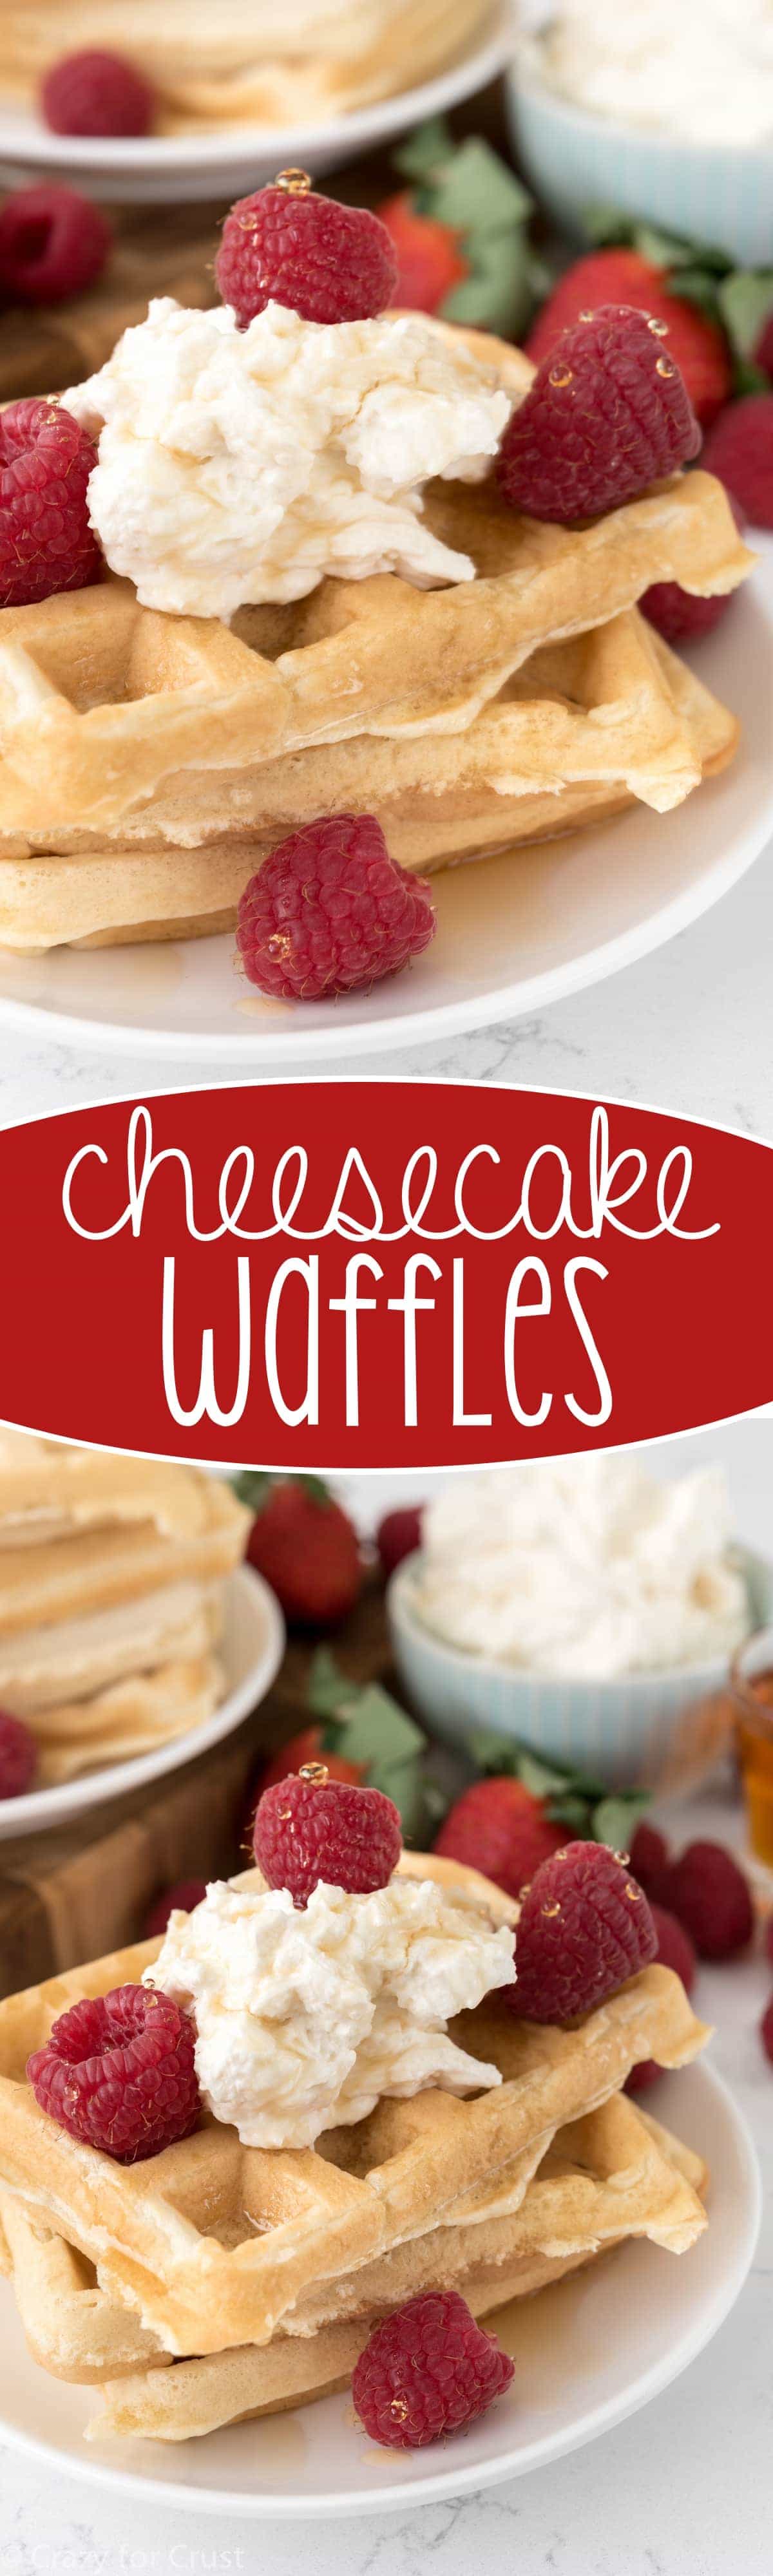 Cheesecake Waffles - this easy breakfast recipe pairs fluffy waffles with no bake cheesecake!